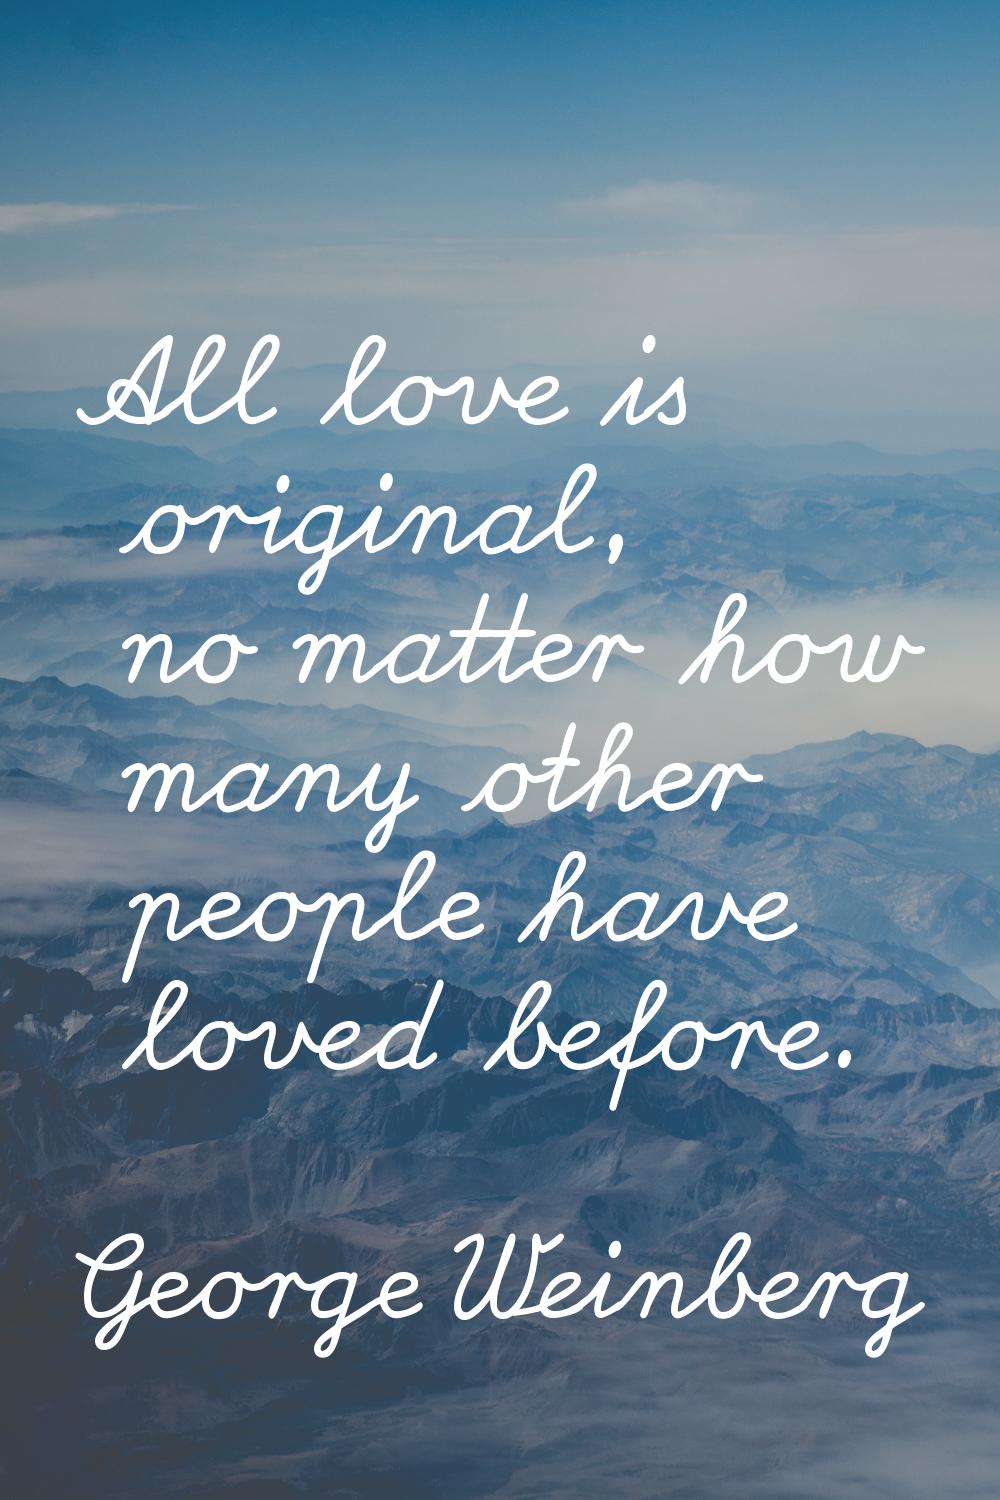 All love is original, no matter how many other people have loved before.